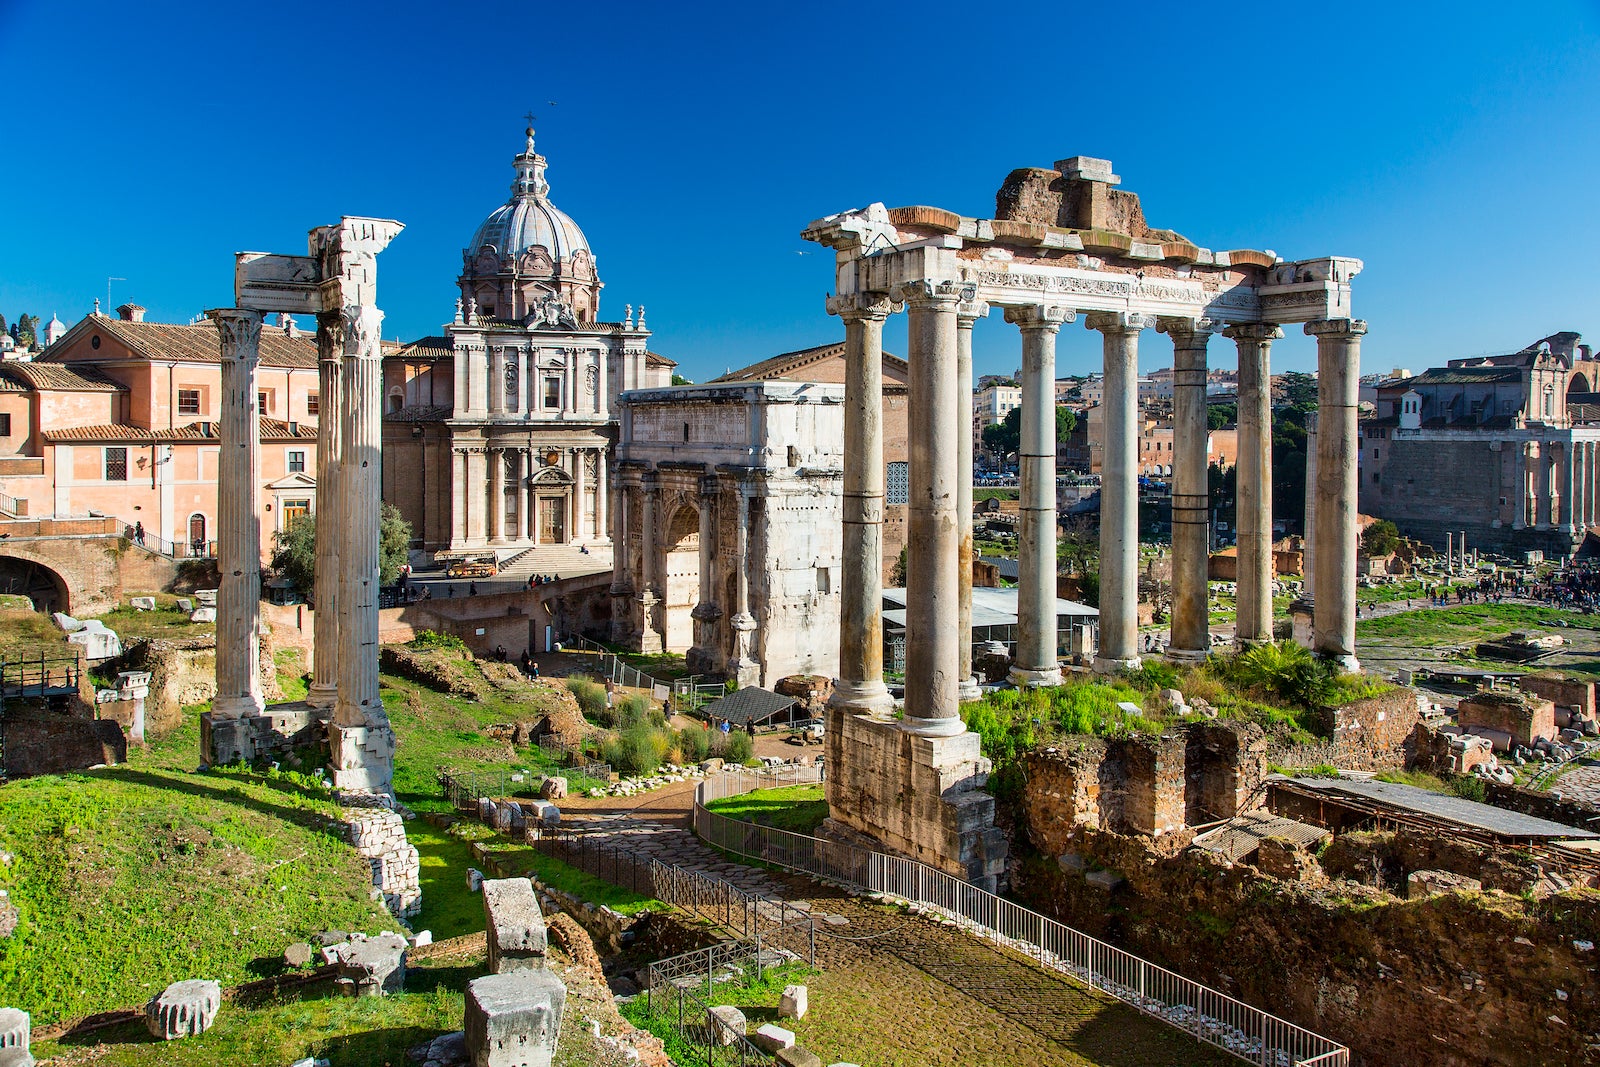 Italy deal alert: Enjoy Rome with nonstop flights from NYC for as low as $189